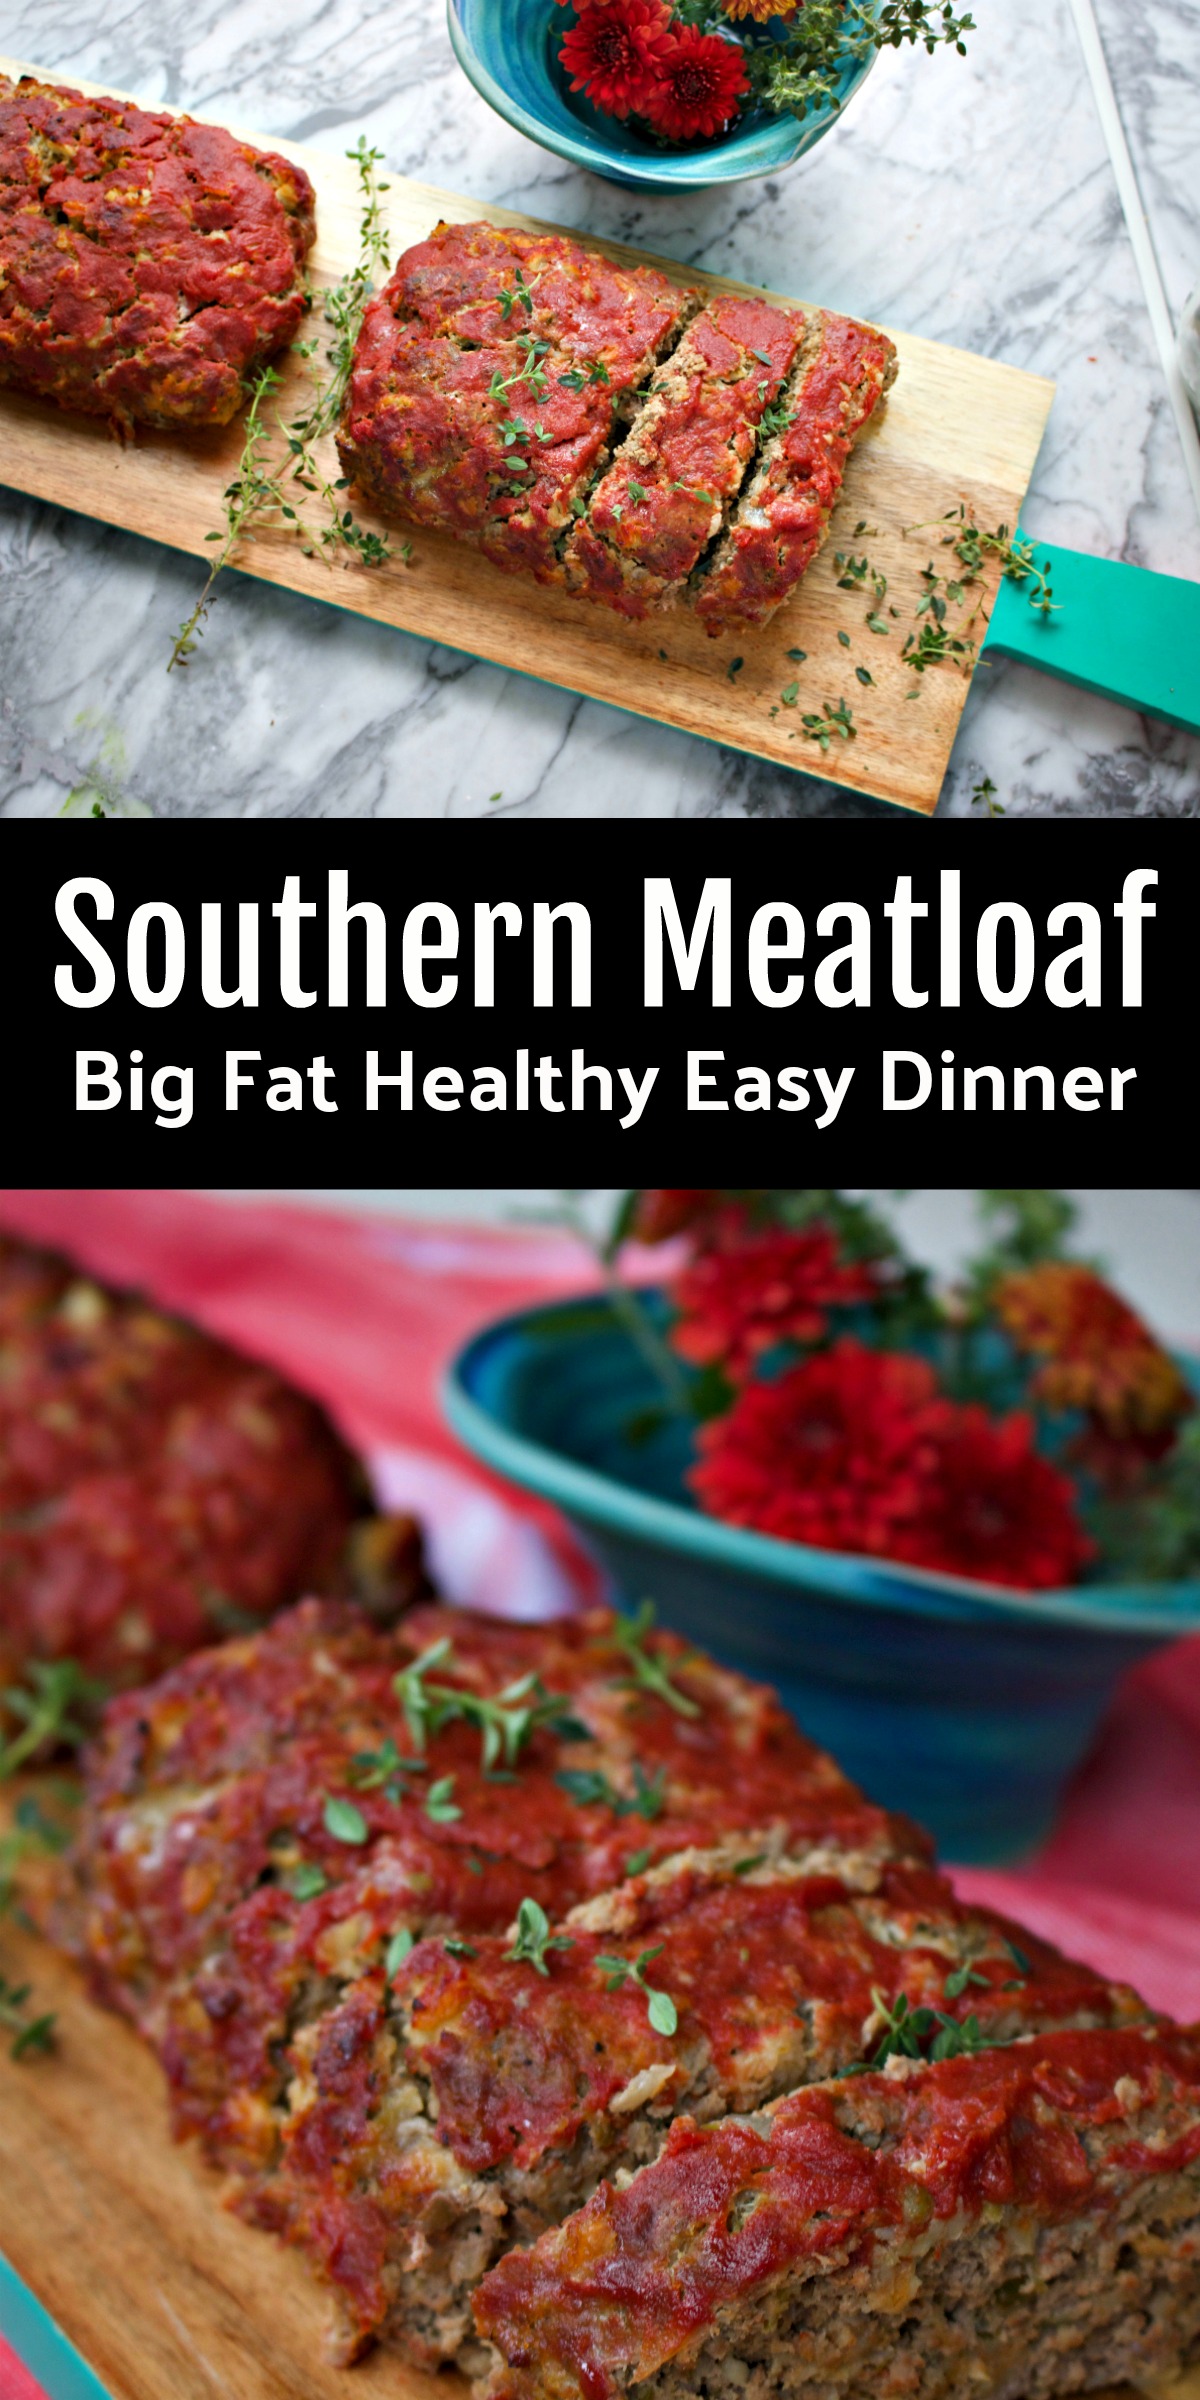 Easy Dinner Southern Meatloaf Recipe from Spinach Tiger